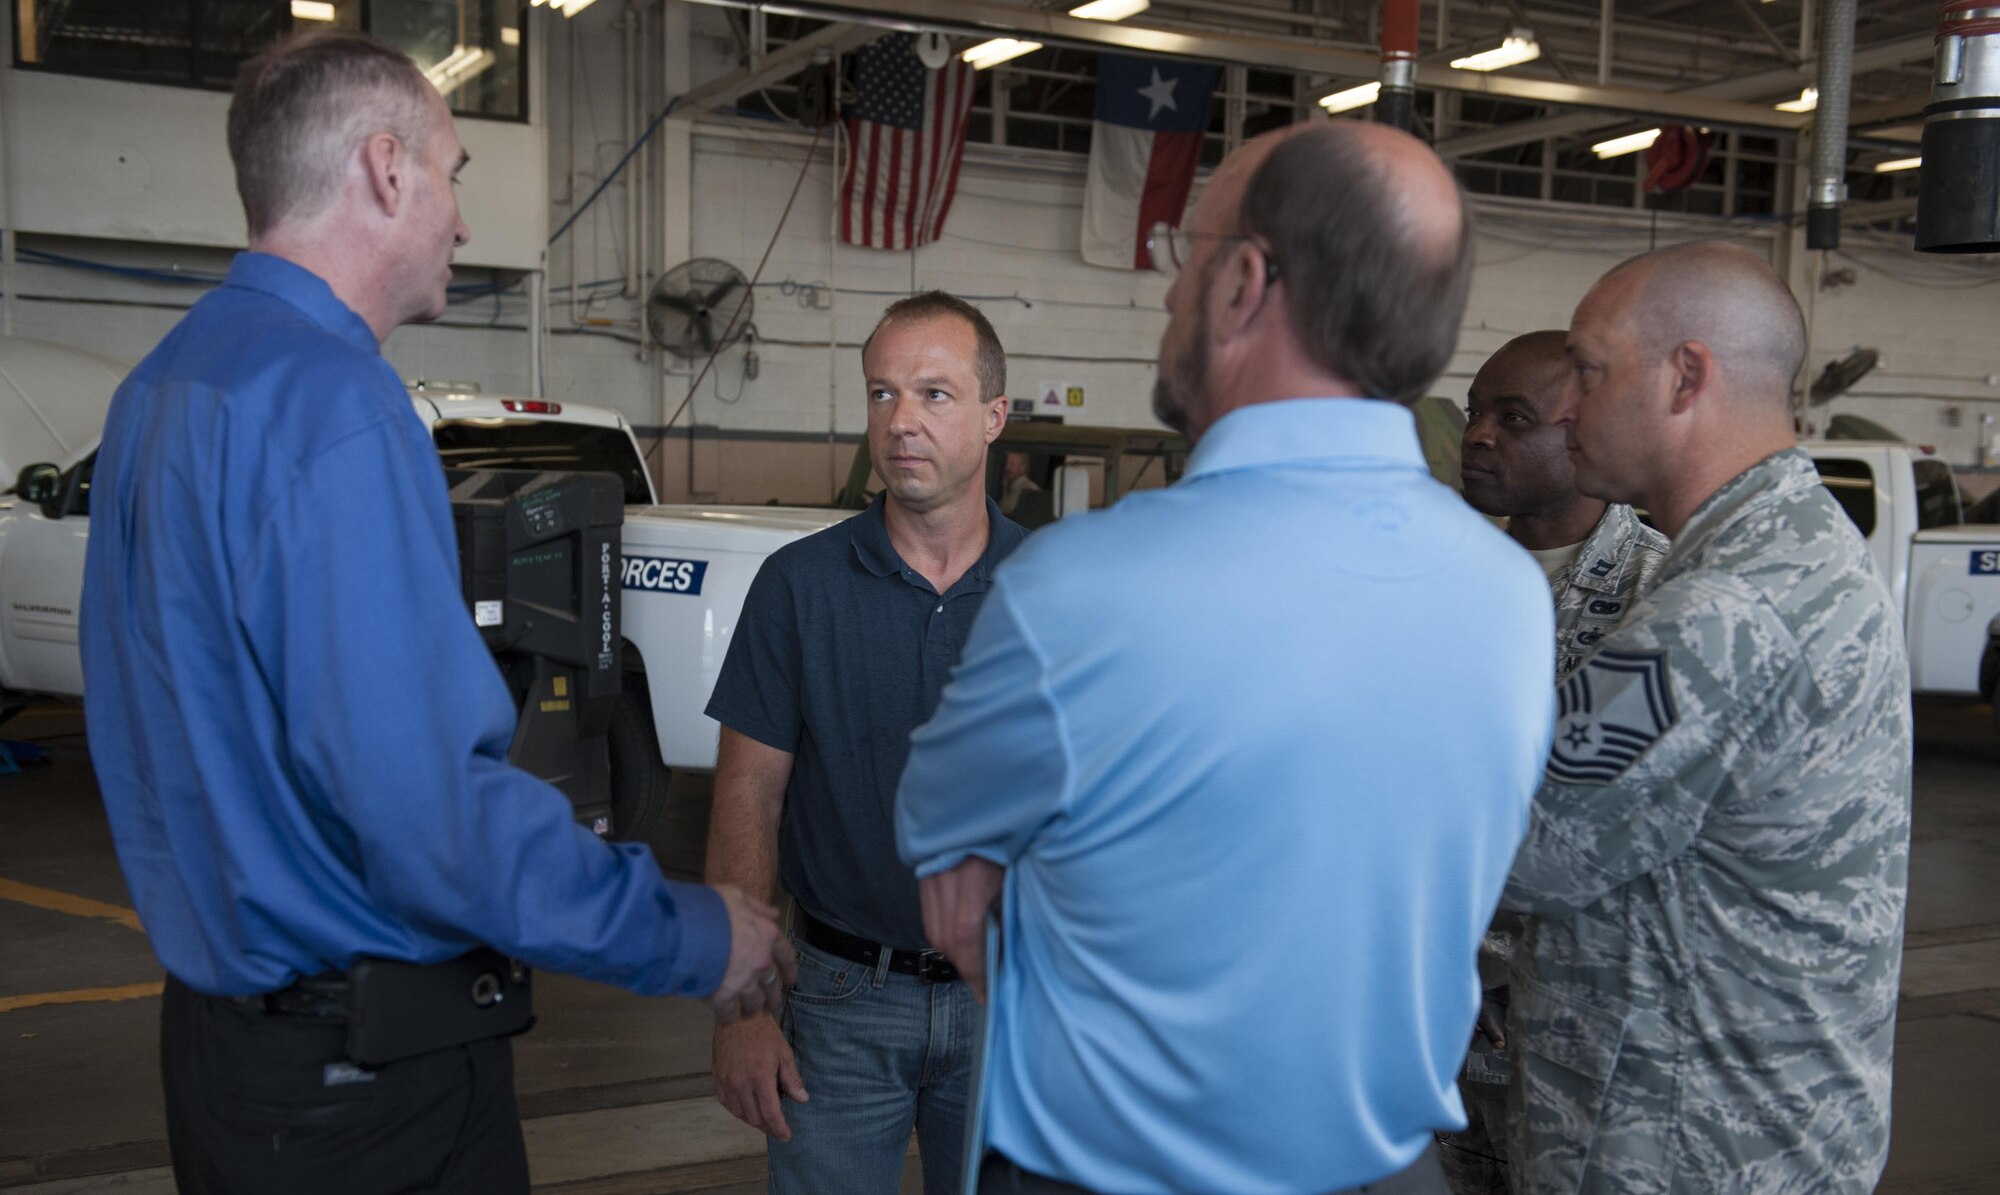 Representatives from Dyess Air Force Base, Arrow Ford and Robins AFB  talk about modifications for the flightline tow tractor, also known as a bobtail vehicle, at Dyess AFB, Texas, June 14, 2017. The 7th Logistics Readiness Squadron vehicle maintenance flight reached out to Arrow Ford to create a solution for the wear and tear of bobtail tires. (U.S. Air Force photo by Airman 1st Class April Lancto)